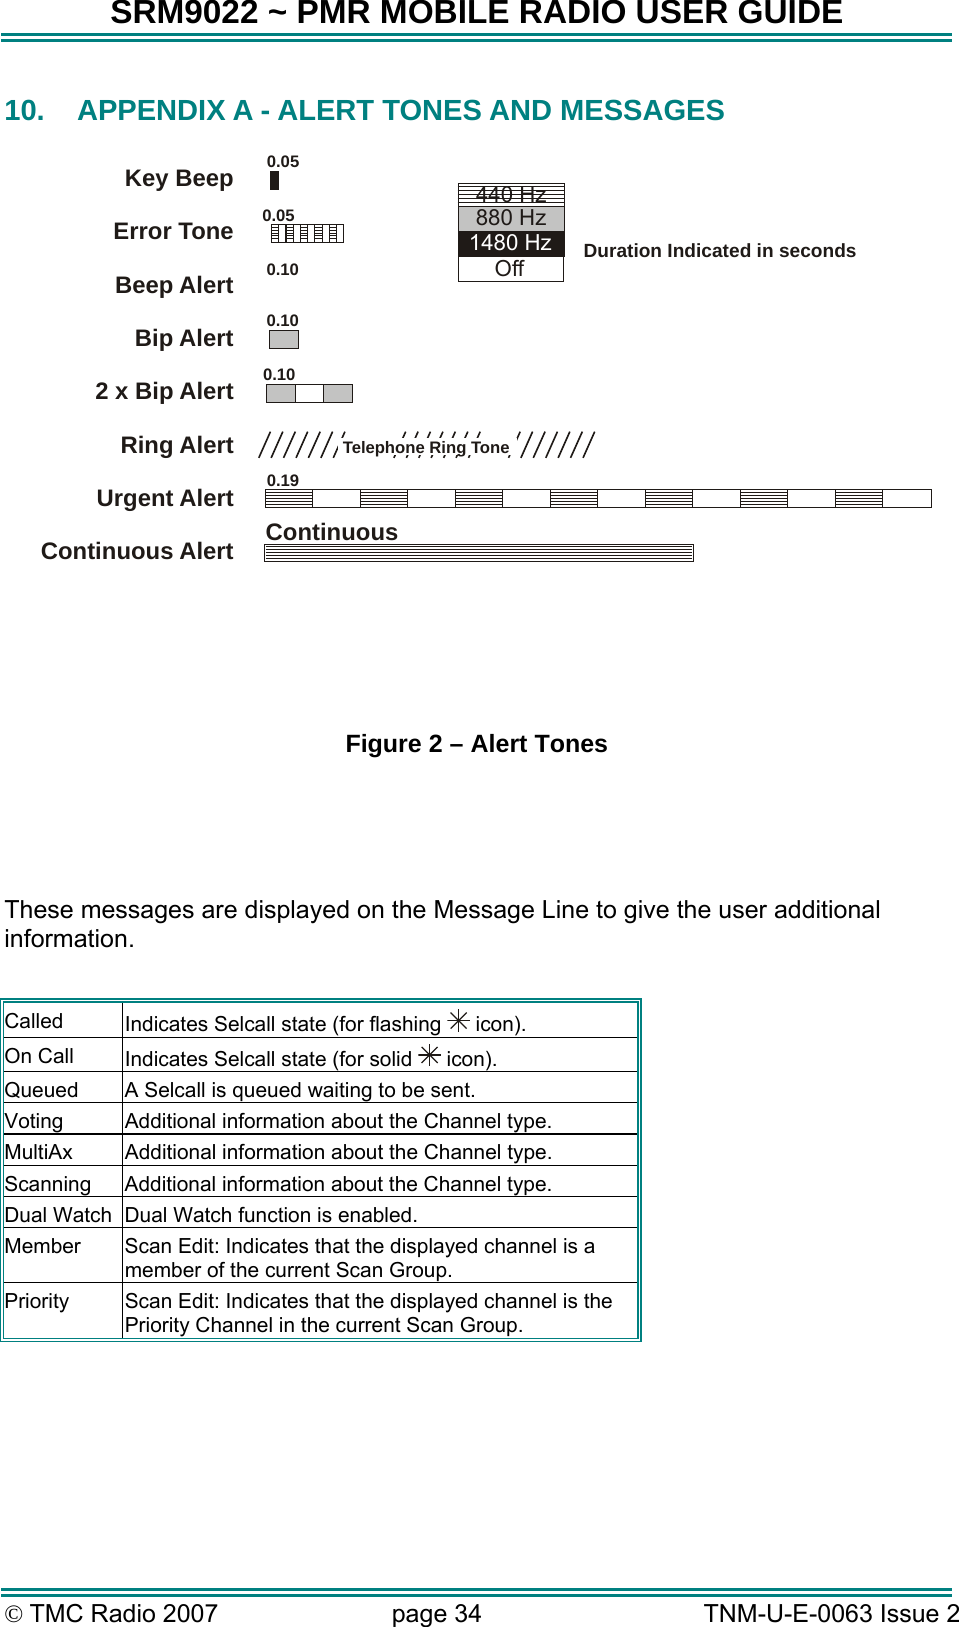 SRM9022 ~ PMR MOBILE RADIO USER GUIDE © TMC Radio 2007  page 34   TNM-U-E-0063 Issue 2 10.  APPENDIX A - ALERT TONES AND MESSAGES   Key BeepError Tone Beep Alert Bip AlertRing AlertUrgent AlertContinuous Alert2 x Bip Alert0.059000_520.100.050.100.10ContinuousTelephone Ring Tone0.19Duration Indicated in seconds880 HzOff1480 Hz440 Hz Figure 2 – Alert Tones    These messages are displayed on the Message Line to give the user additional information.  Called  Indicates Selcall state (for flashing   icon). On Call  Indicates Selcall state (for solid   icon). Queued  A Selcall is queued waiting to be sent. Voting  Additional information about the Channel type. MultiAx  Additional information about the Channel type. Scanning  Additional information about the Channel type. Dual Watch  Dual Watch function is enabled. Member  Scan Edit: Indicates that the displayed channel is a member of the current Scan Group. Priority  Scan Edit: Indicates that the displayed channel is the Priority Channel in the current Scan Group.  